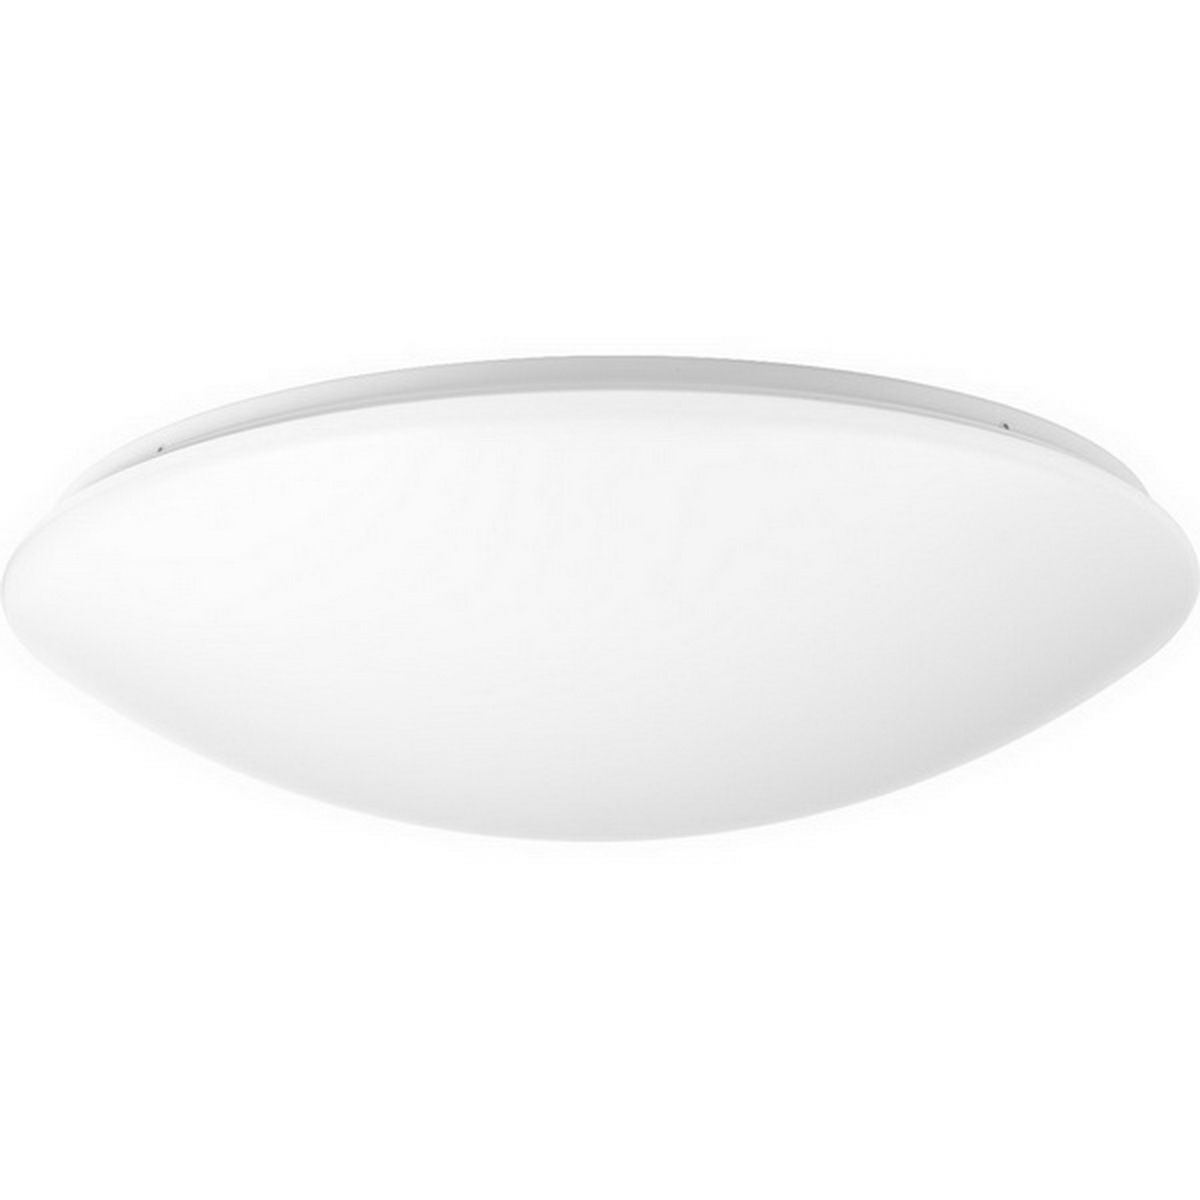 Drums and Clouds 17 in LED Ceiling Puff Light 3000 Lumens 3000K White finish